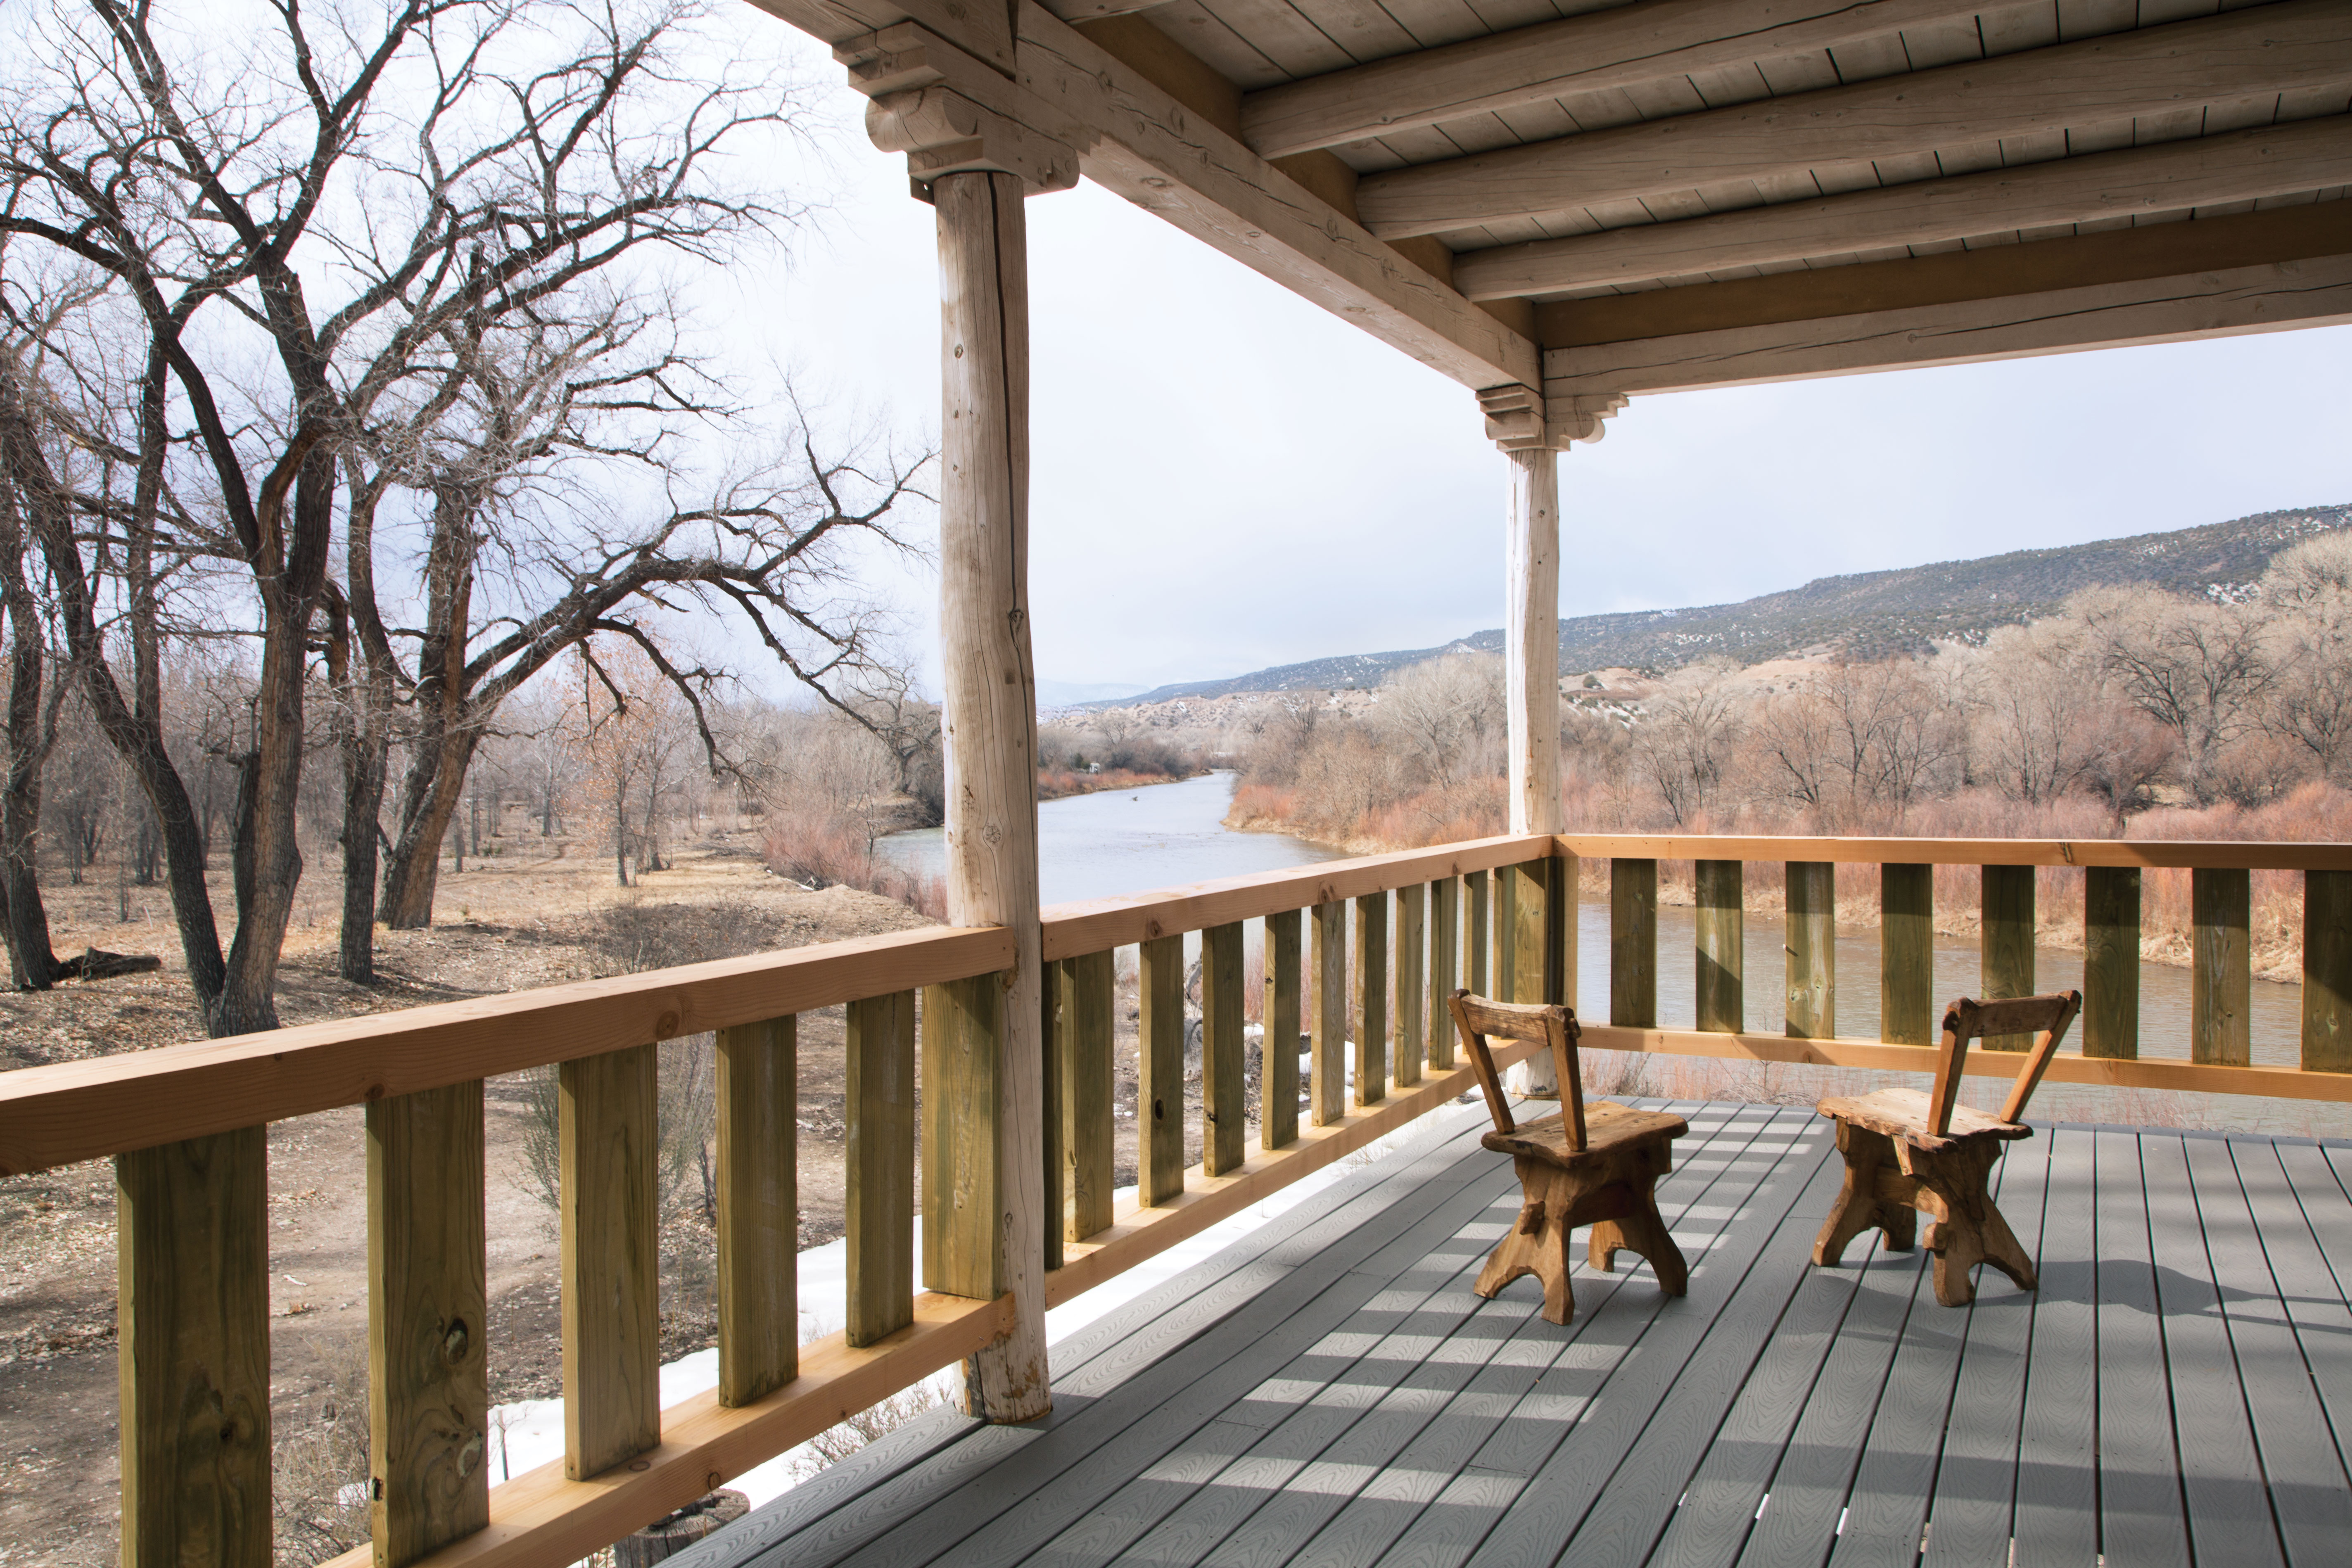 The deck of the River House at Los Luceros Historic Property